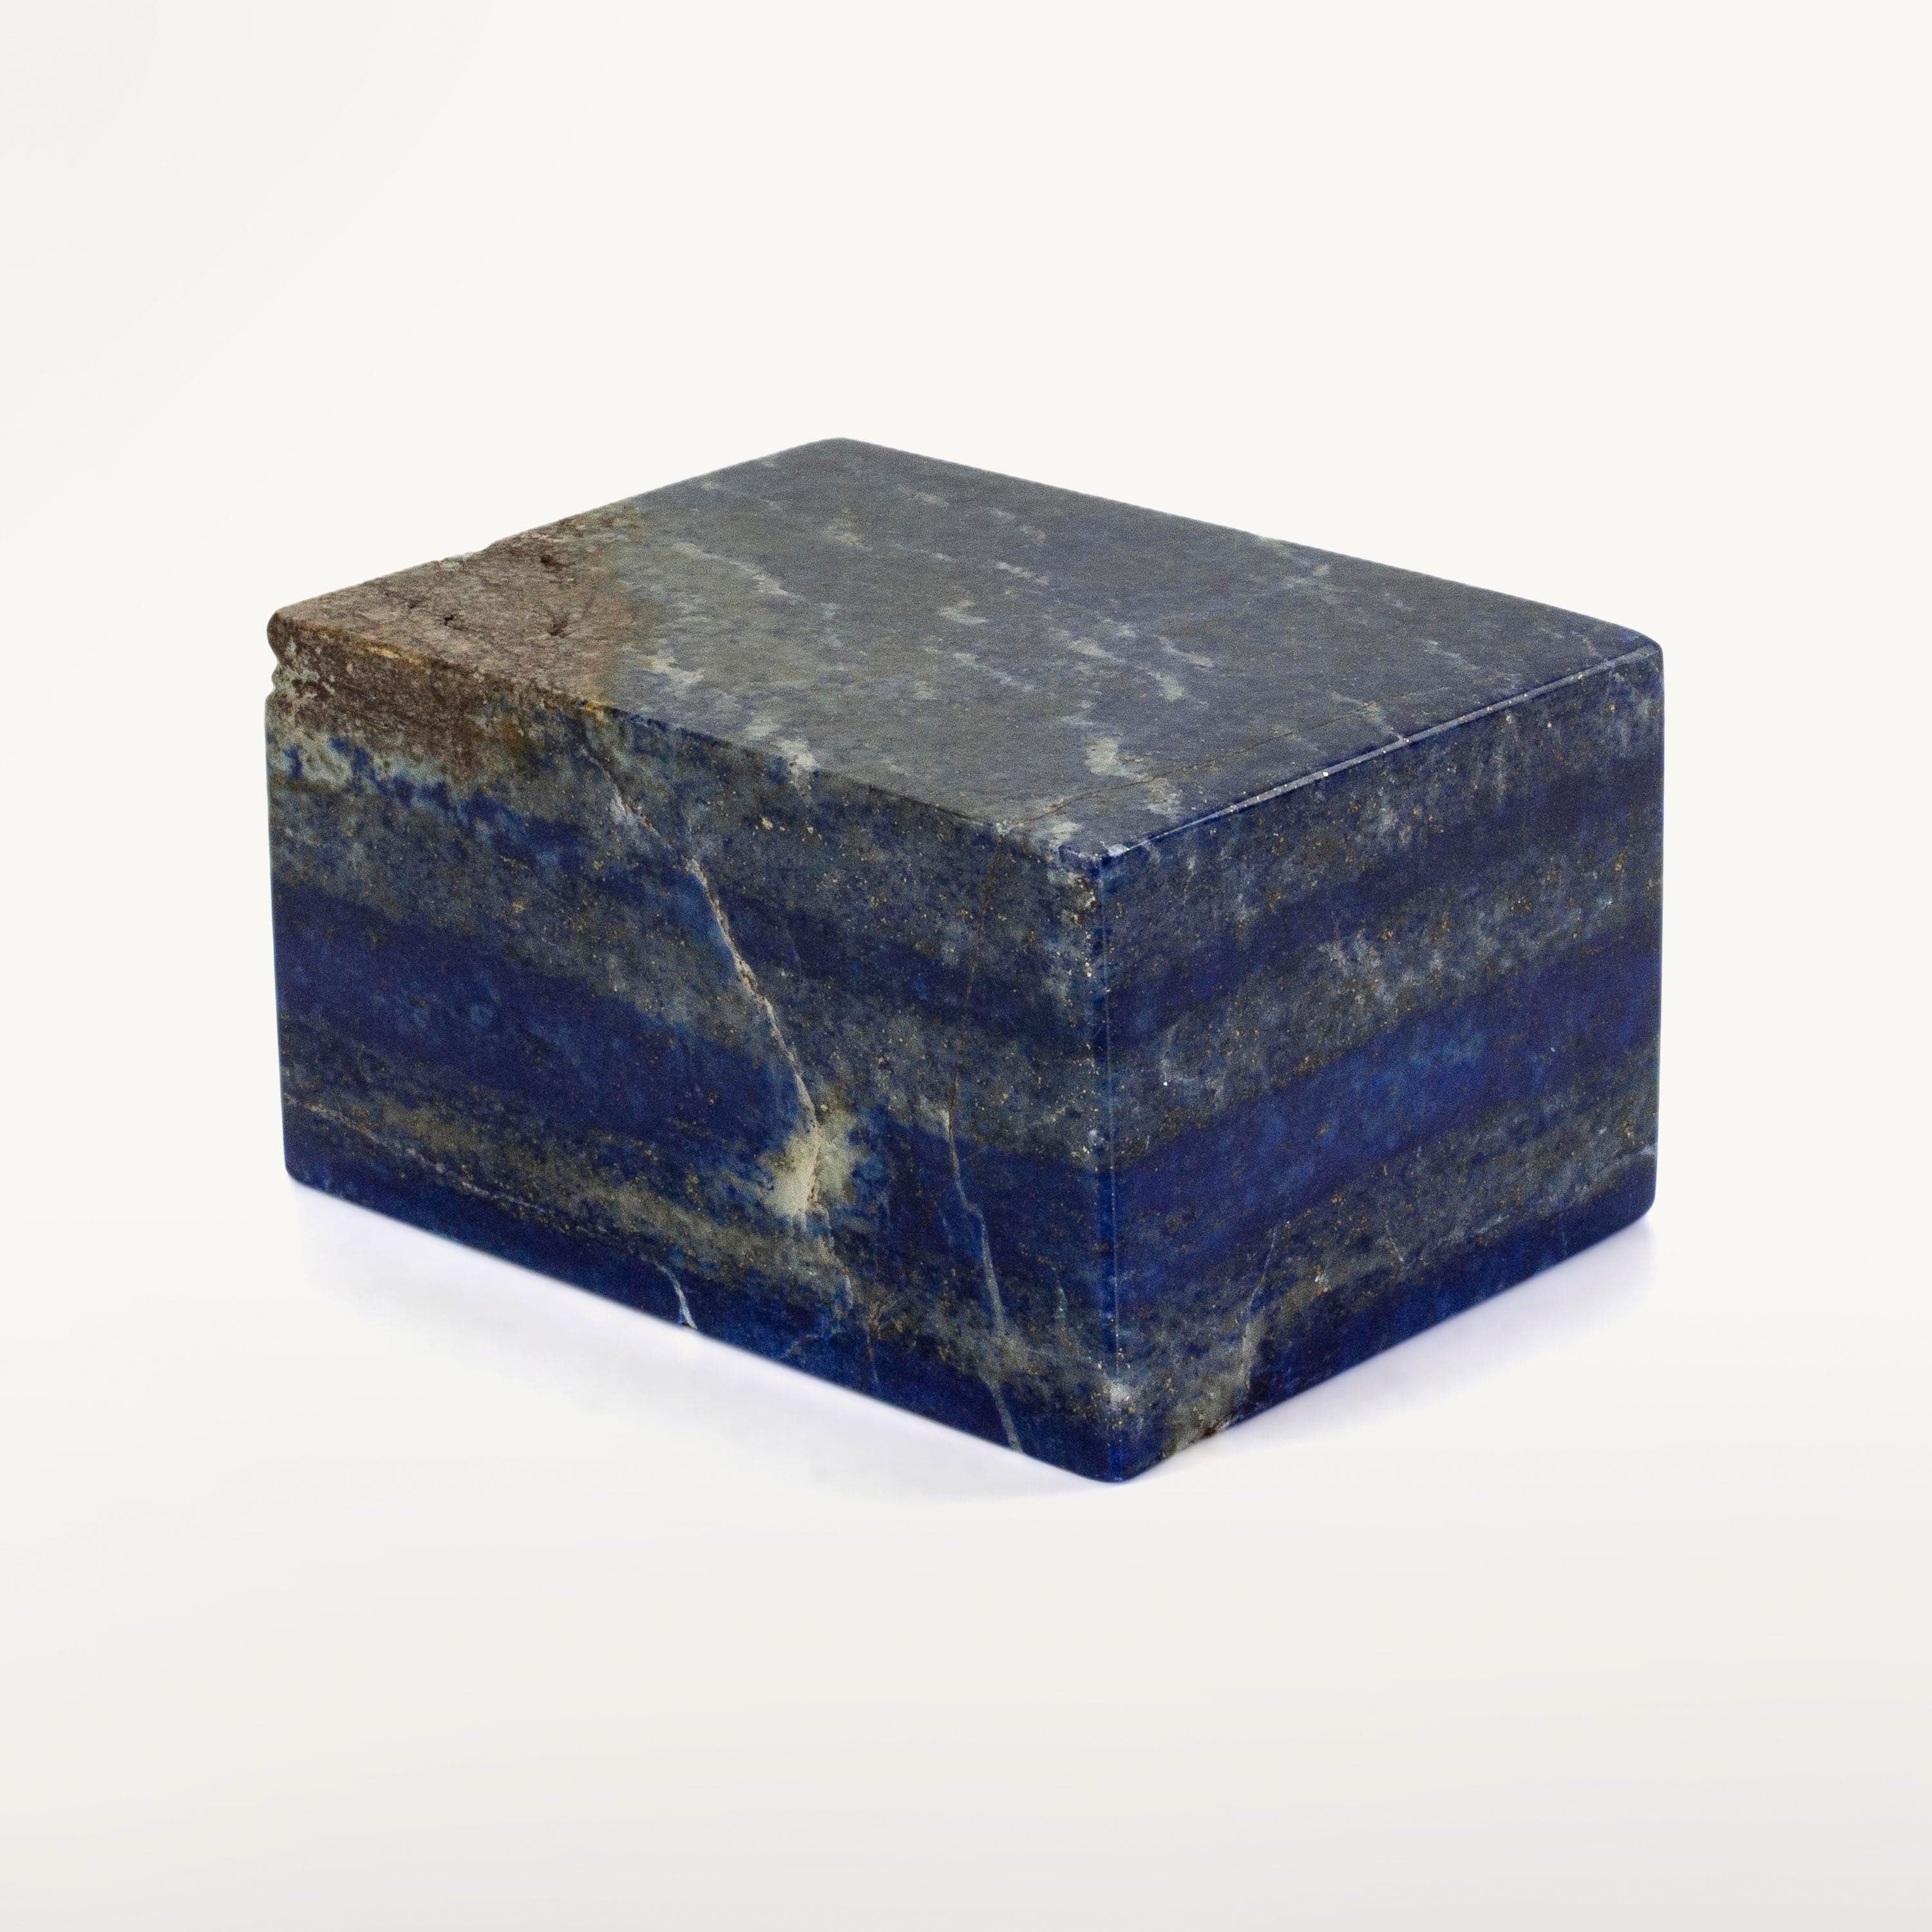 Kalifano Lapis Lapis Lazuil Cube from Afghanistan - 640 g / 1.4 lbs LP700.004